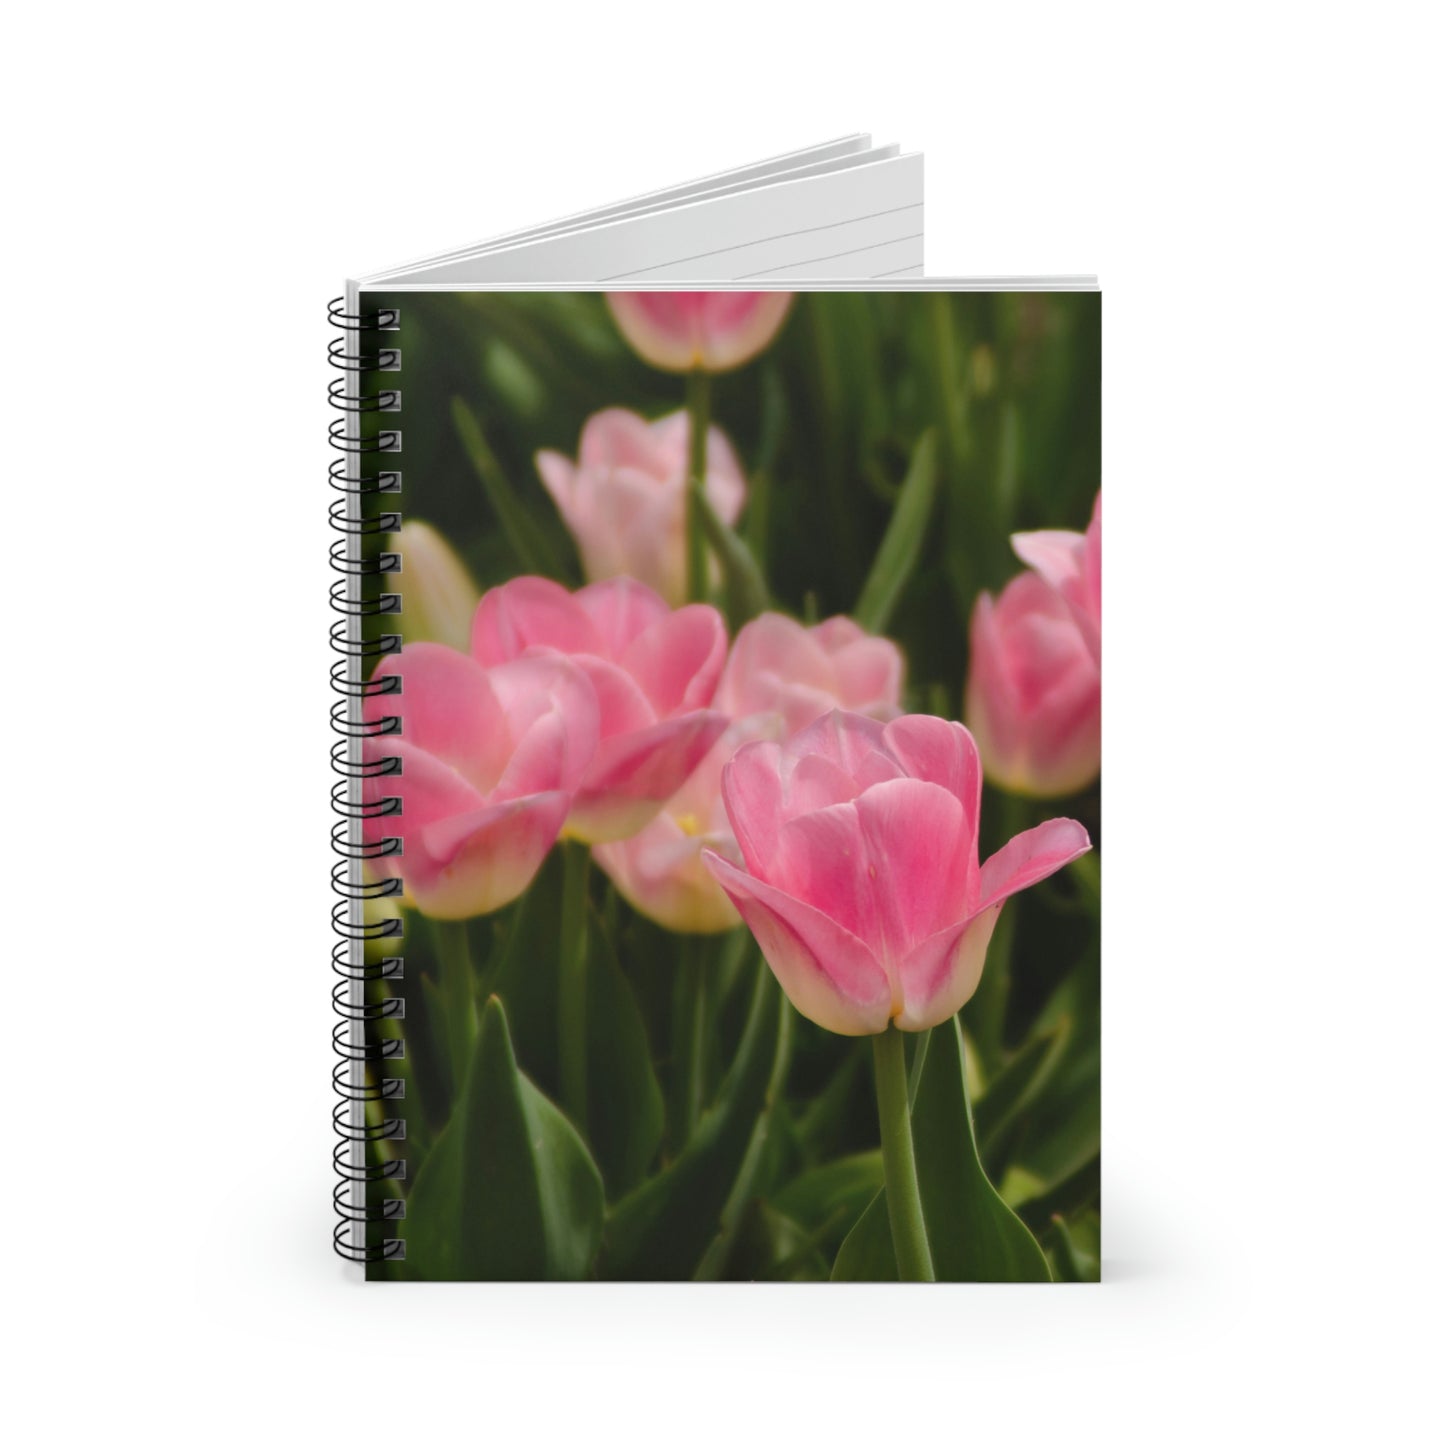 Flowers 17 Spiral Notebook - Ruled Line